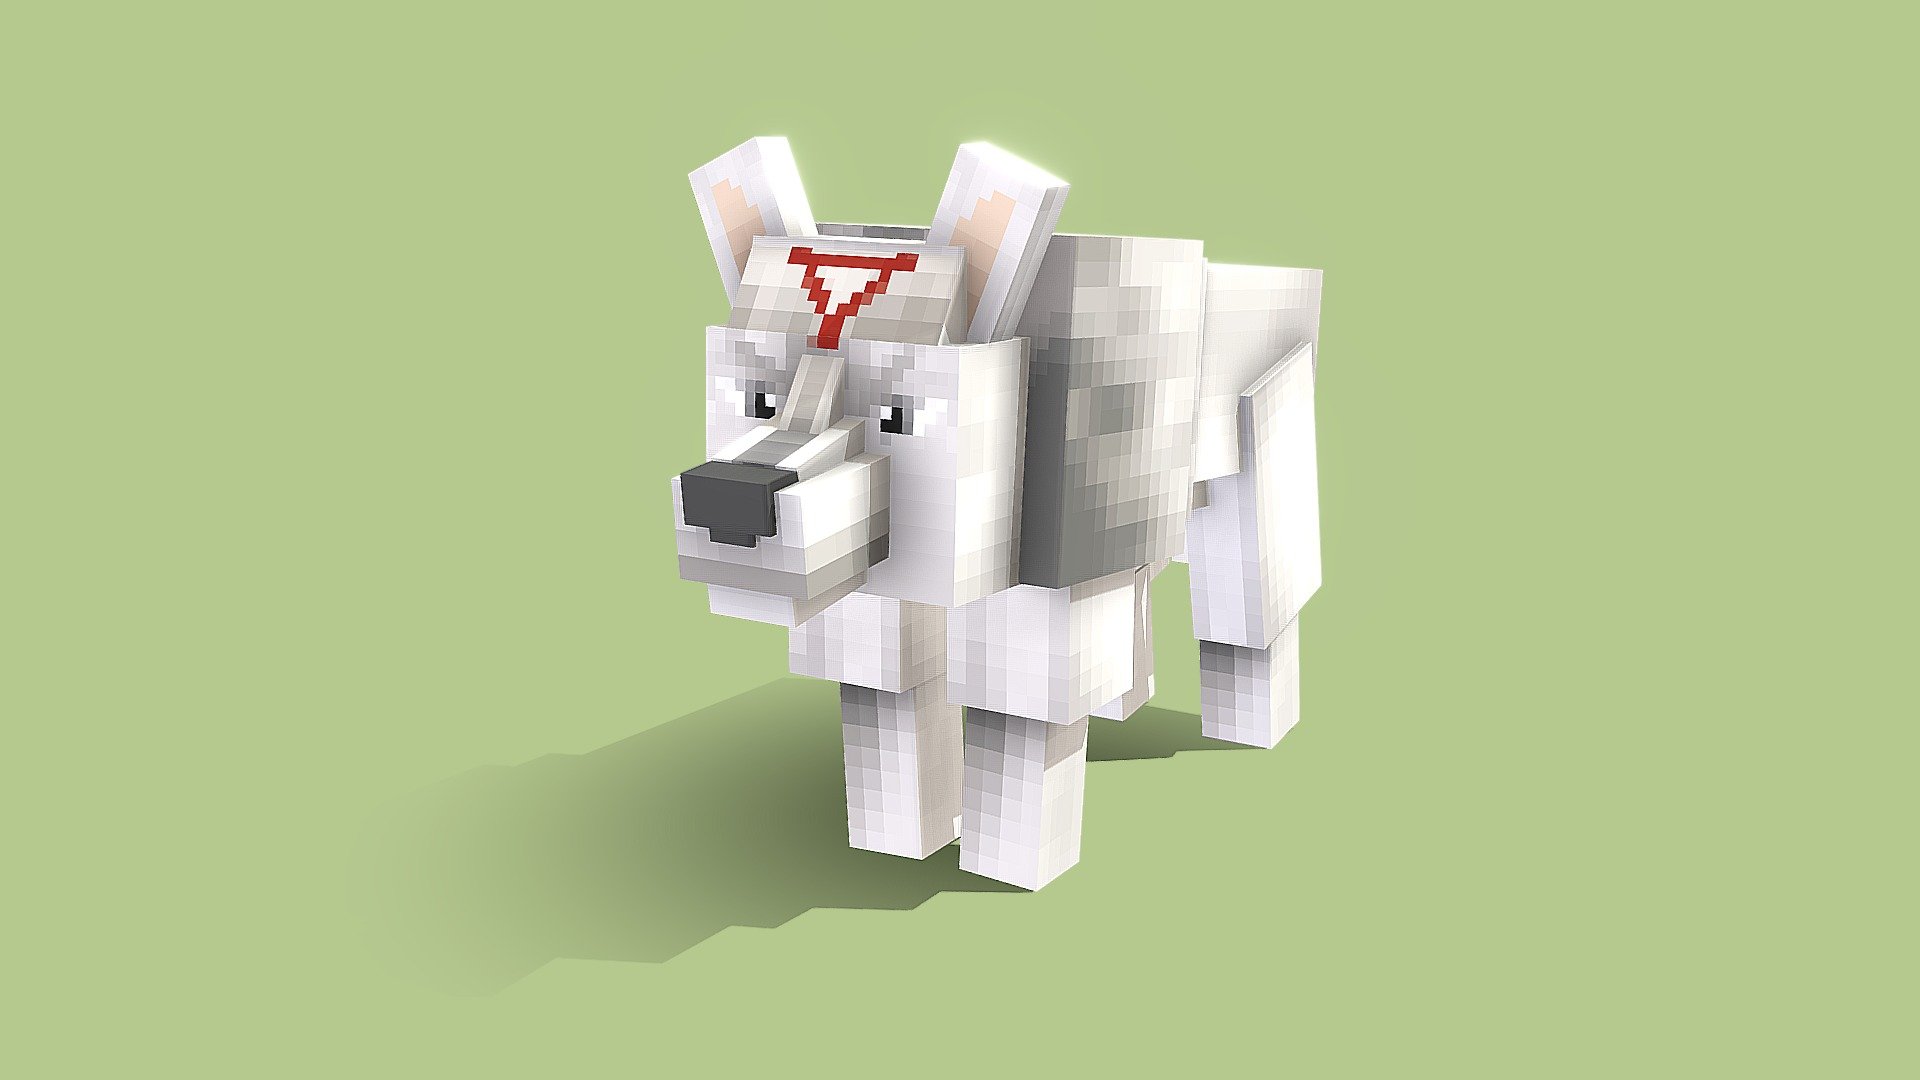 This is a copyright model for the UHC server &ldquo;DOMEI” - Domei - Wolf JJK - 3D model by Frayseur 3d model